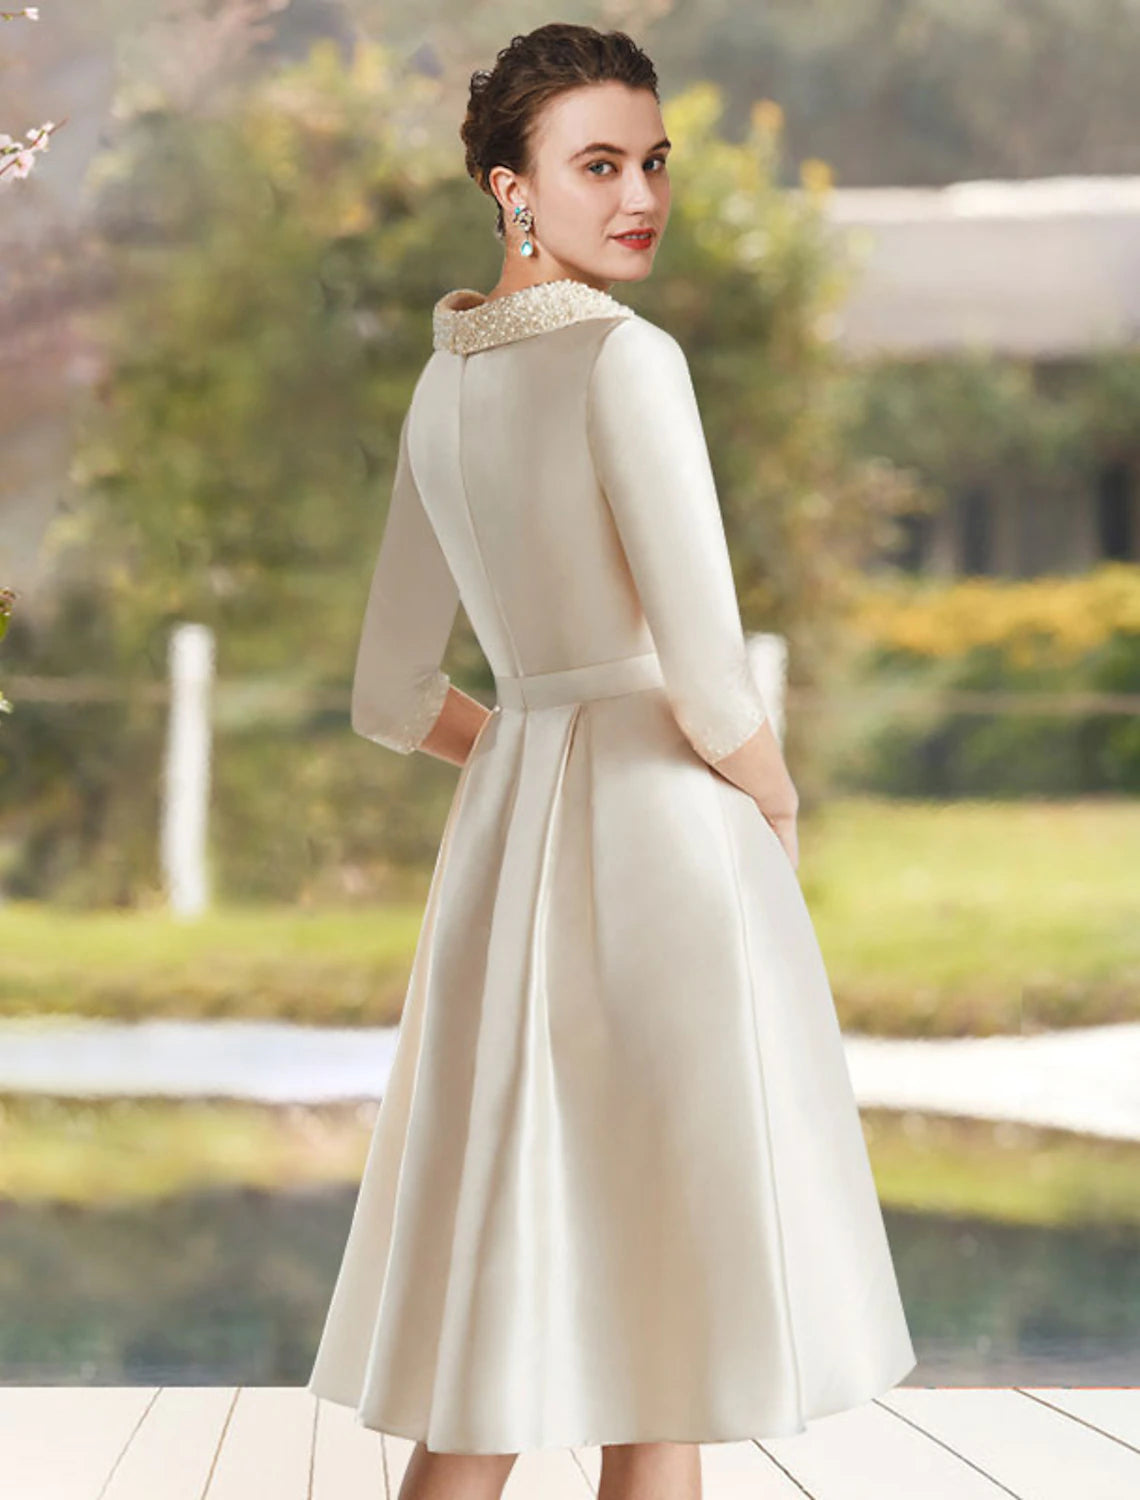 A-Line Mother of the Bride Dress Wedding Guest Elegant Jewel Neck Knee Length Satin Half Sleeve with Beading